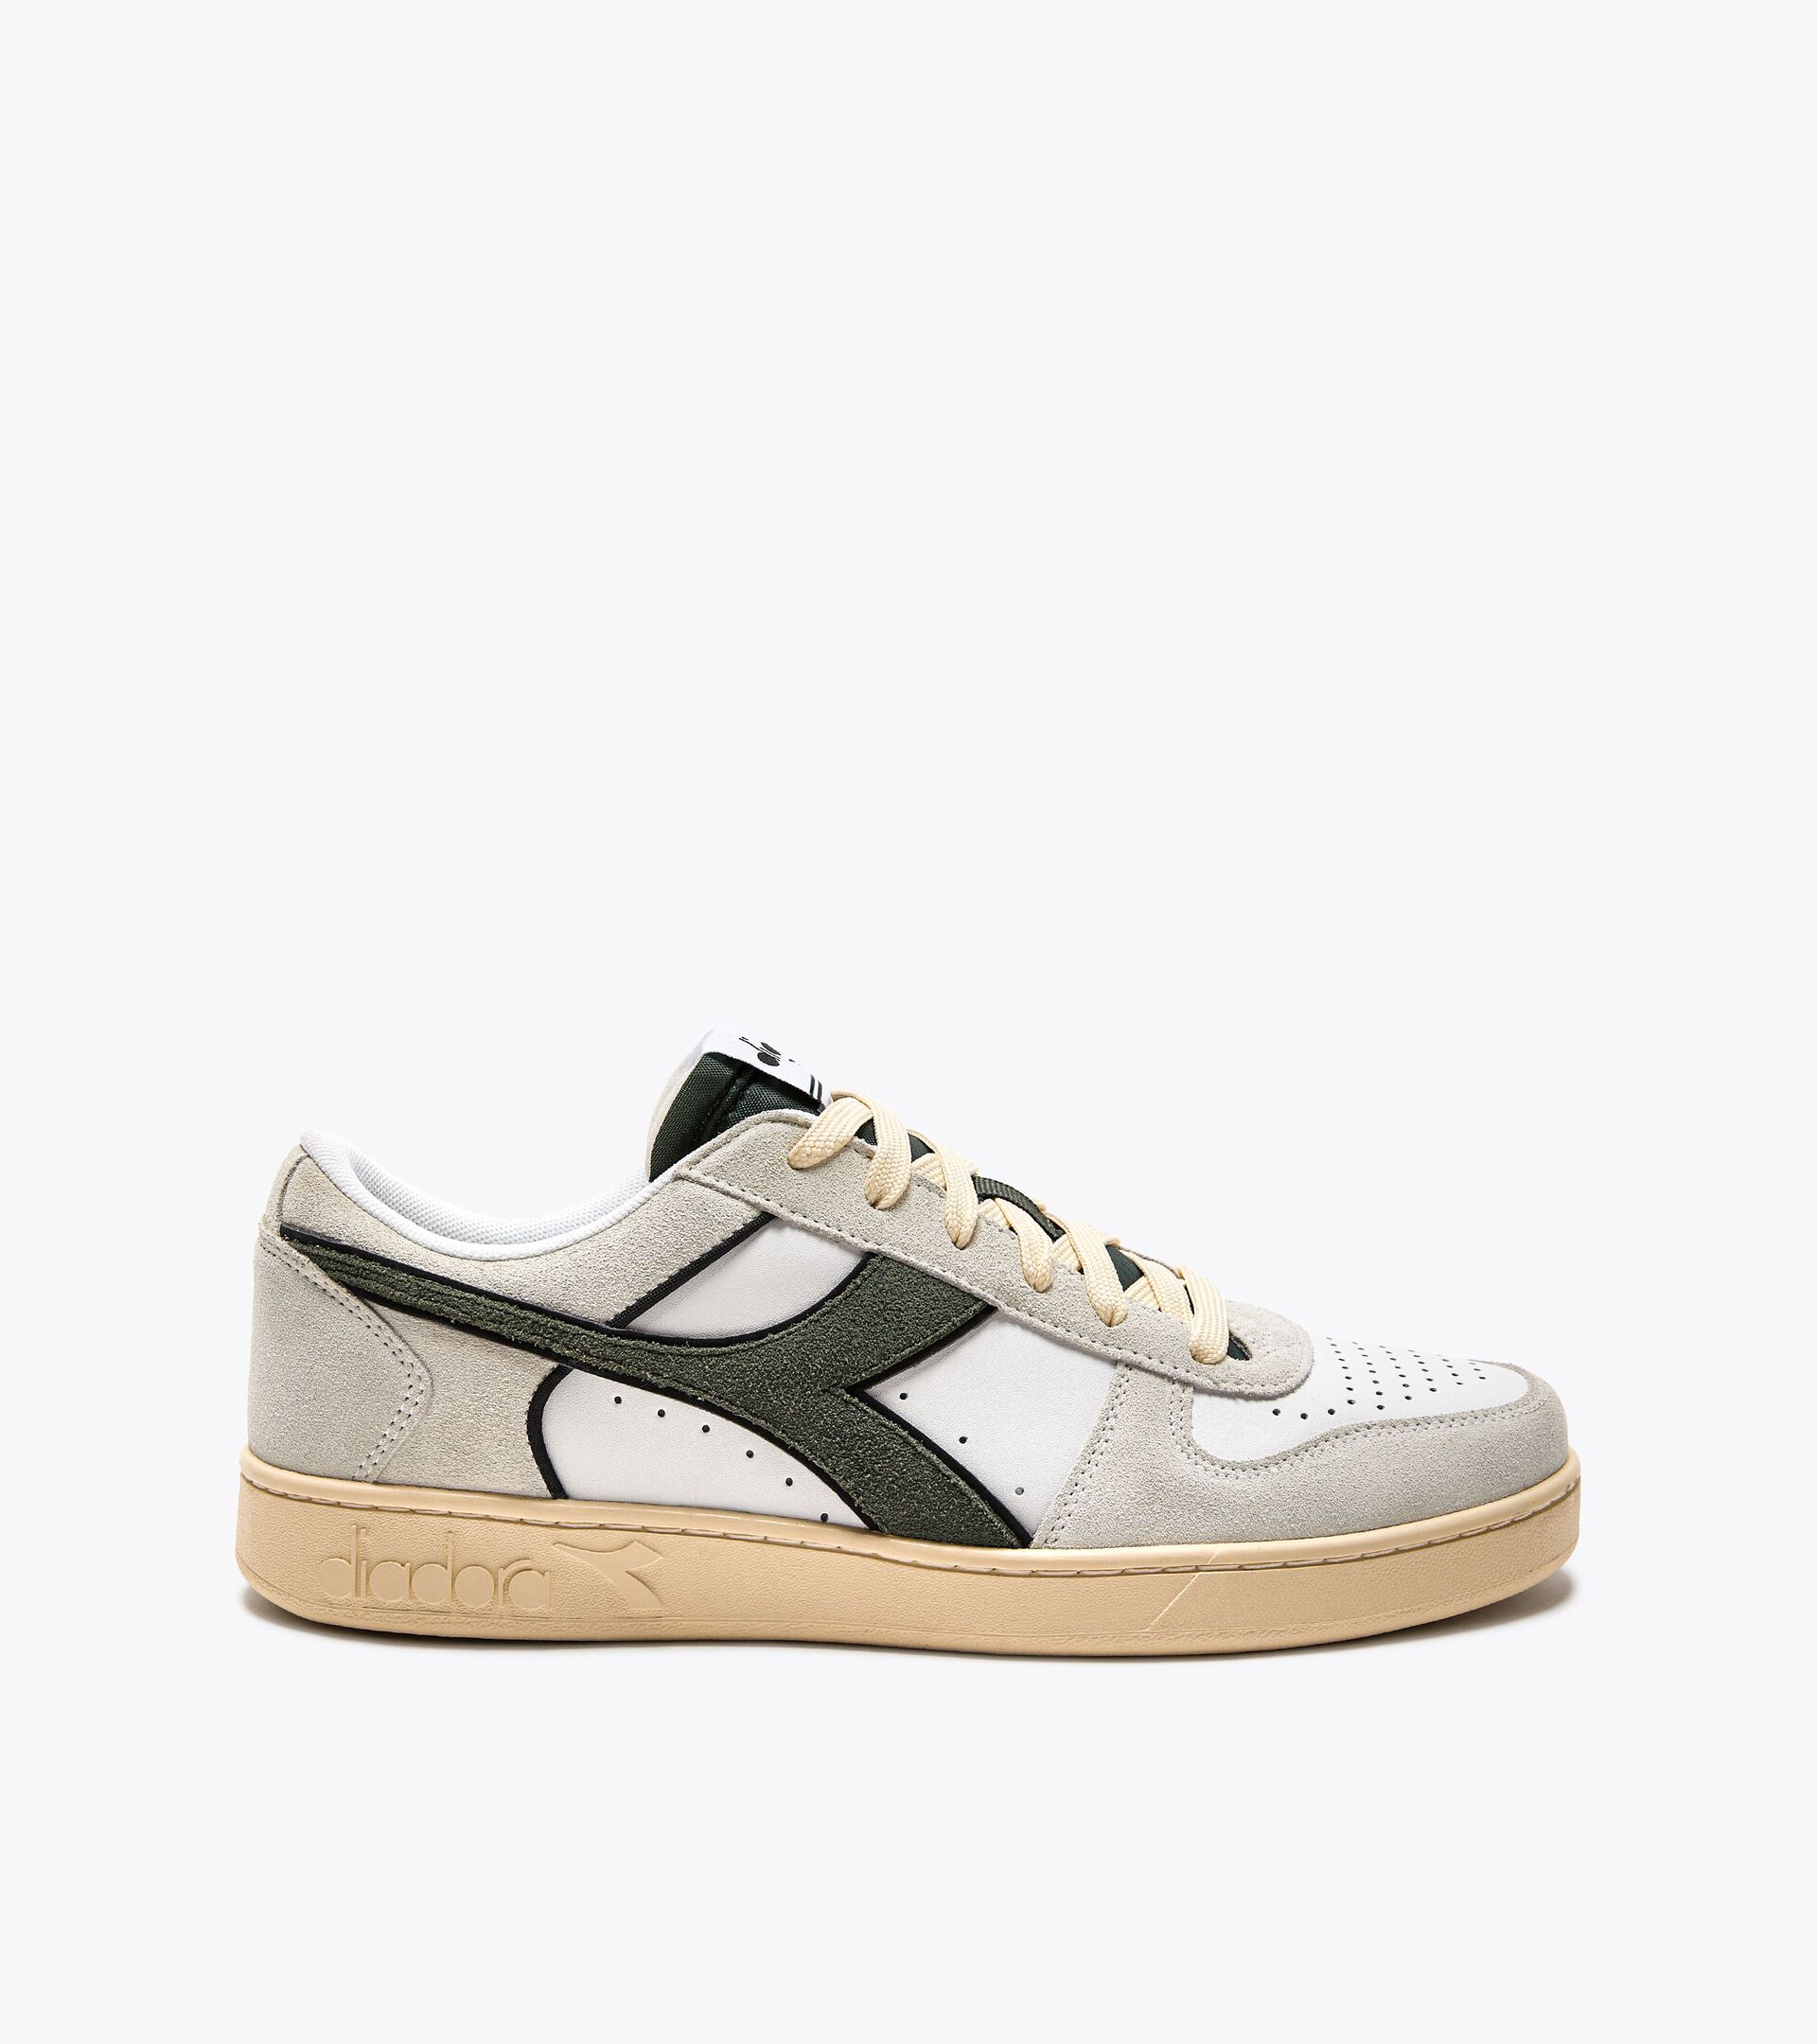 sl/80 sneakers in leather and suede